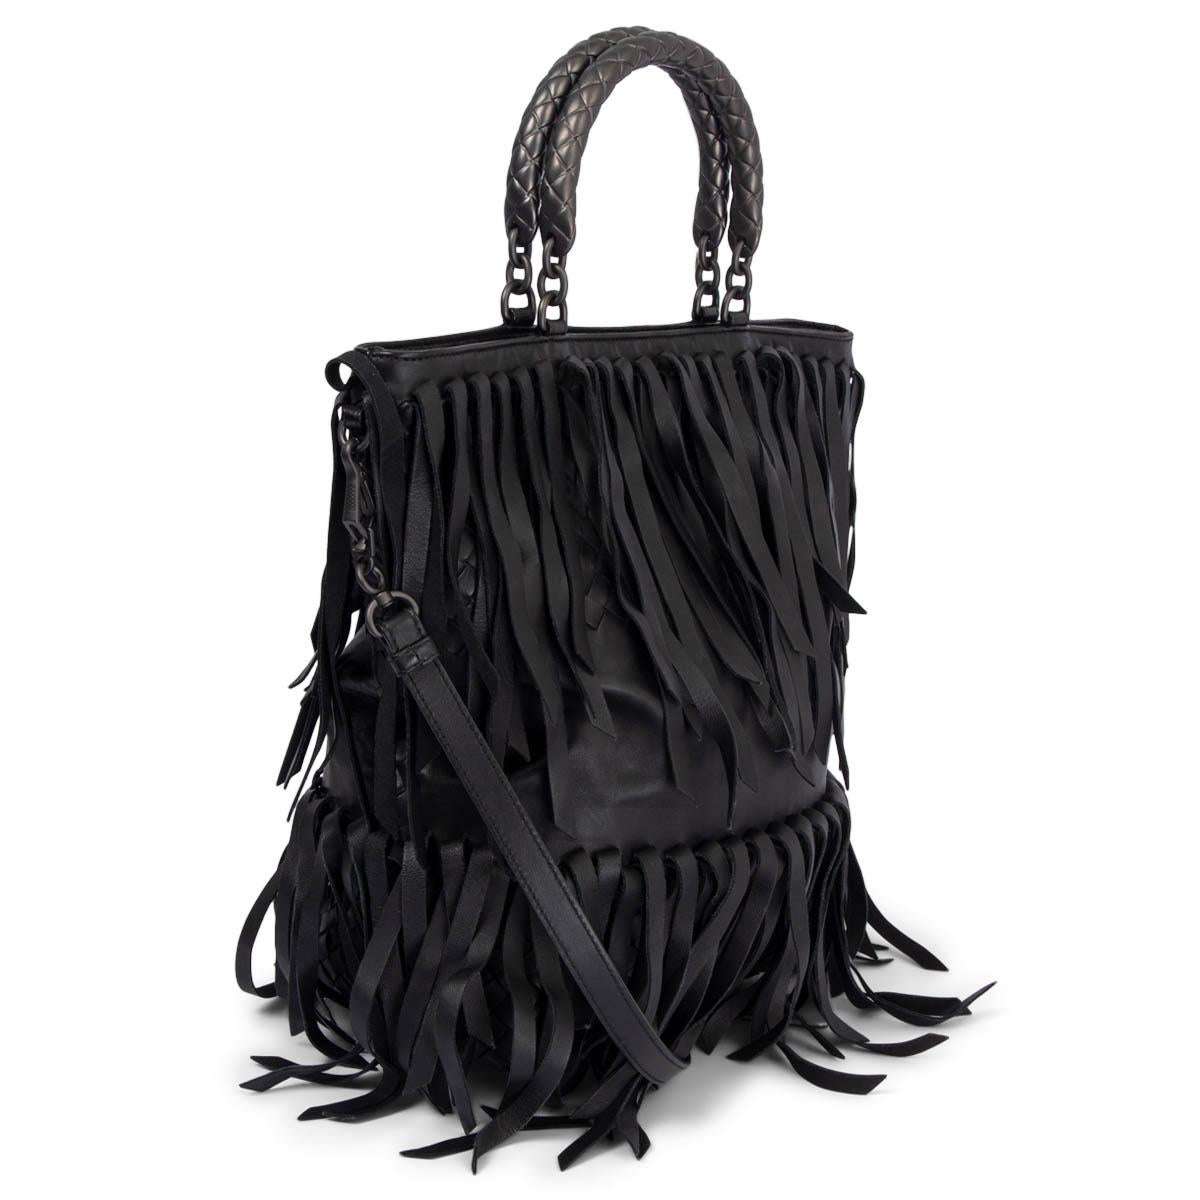 100% authentic Bottega Veneta fringed tote bag in black Intrecciato nappa leather. It features Bottega's signature woven leather and embossed woven patterned metal top handles and a long detachable shoulder-strap. Lined in taupe suede with one